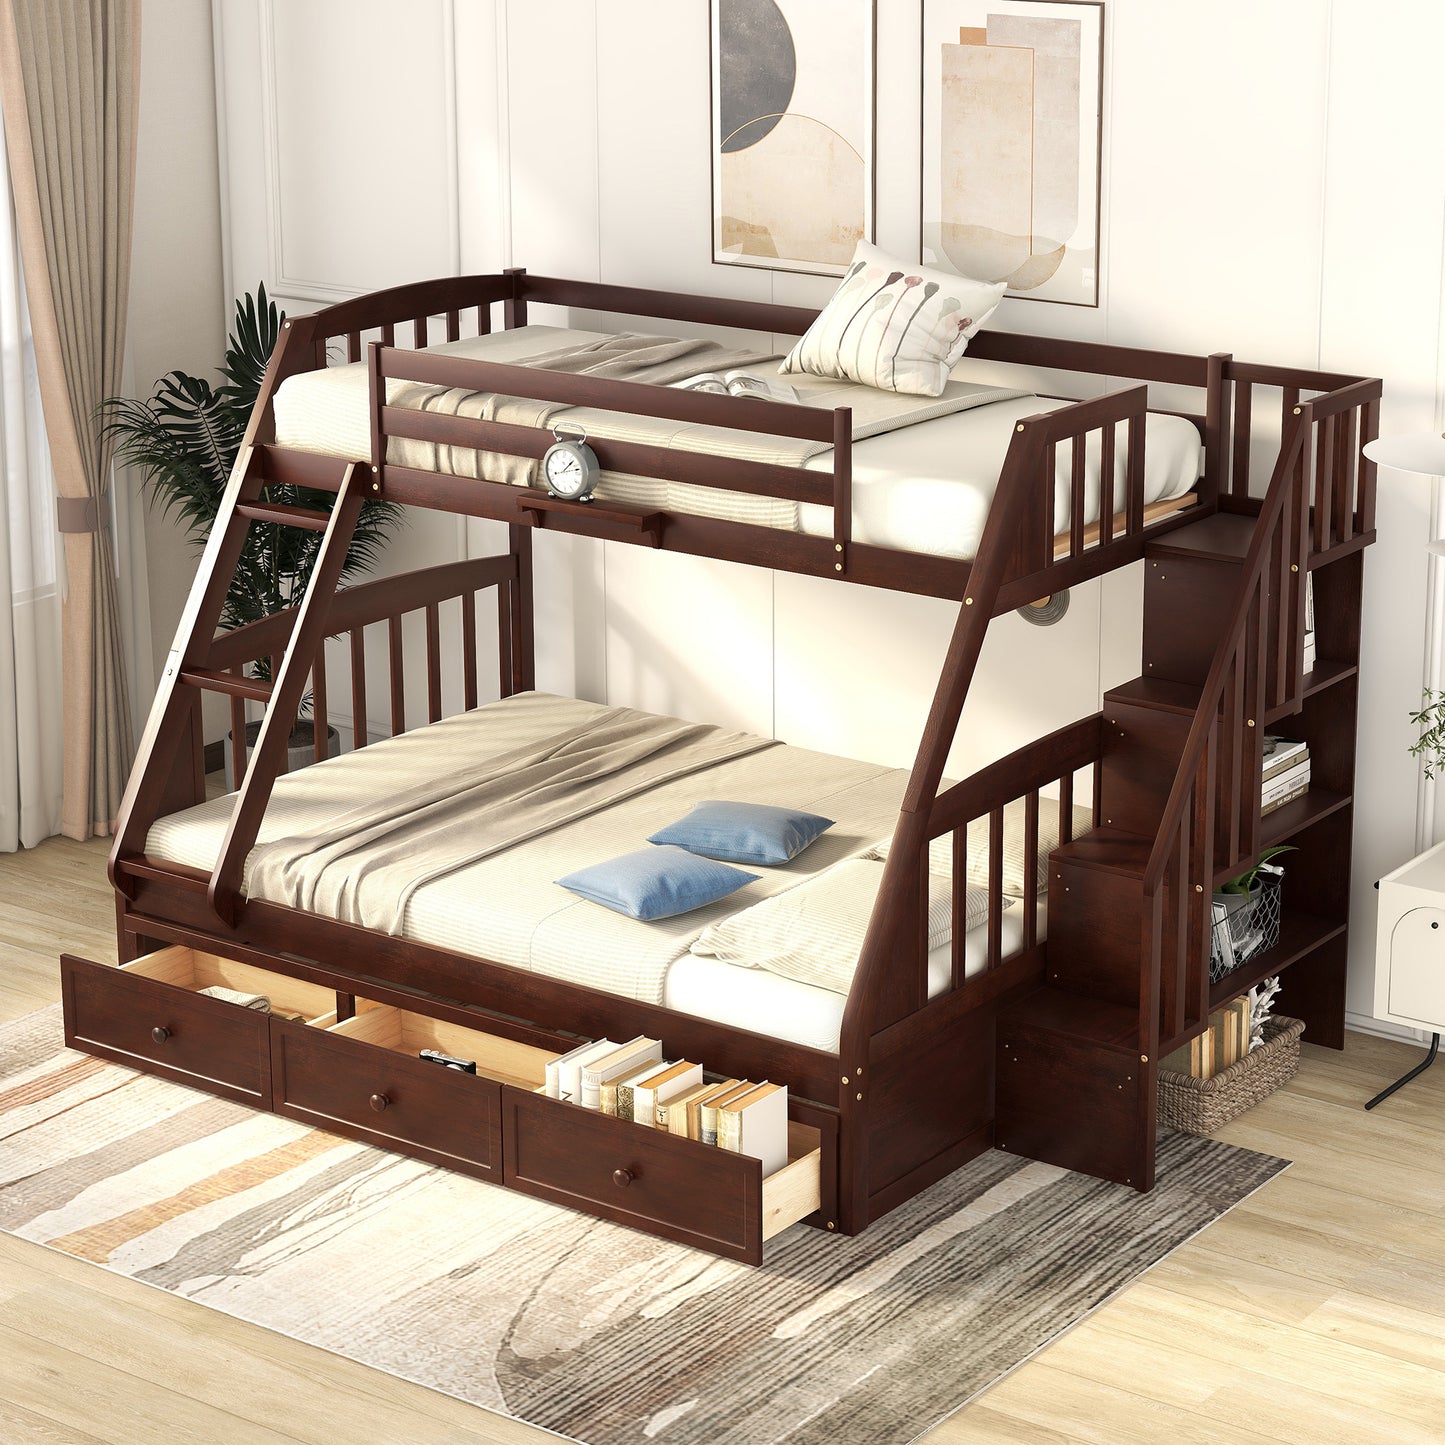 Twin-Over-Full Bunk Bed with Drawers，Ladder and Storage Staircase, Espresso